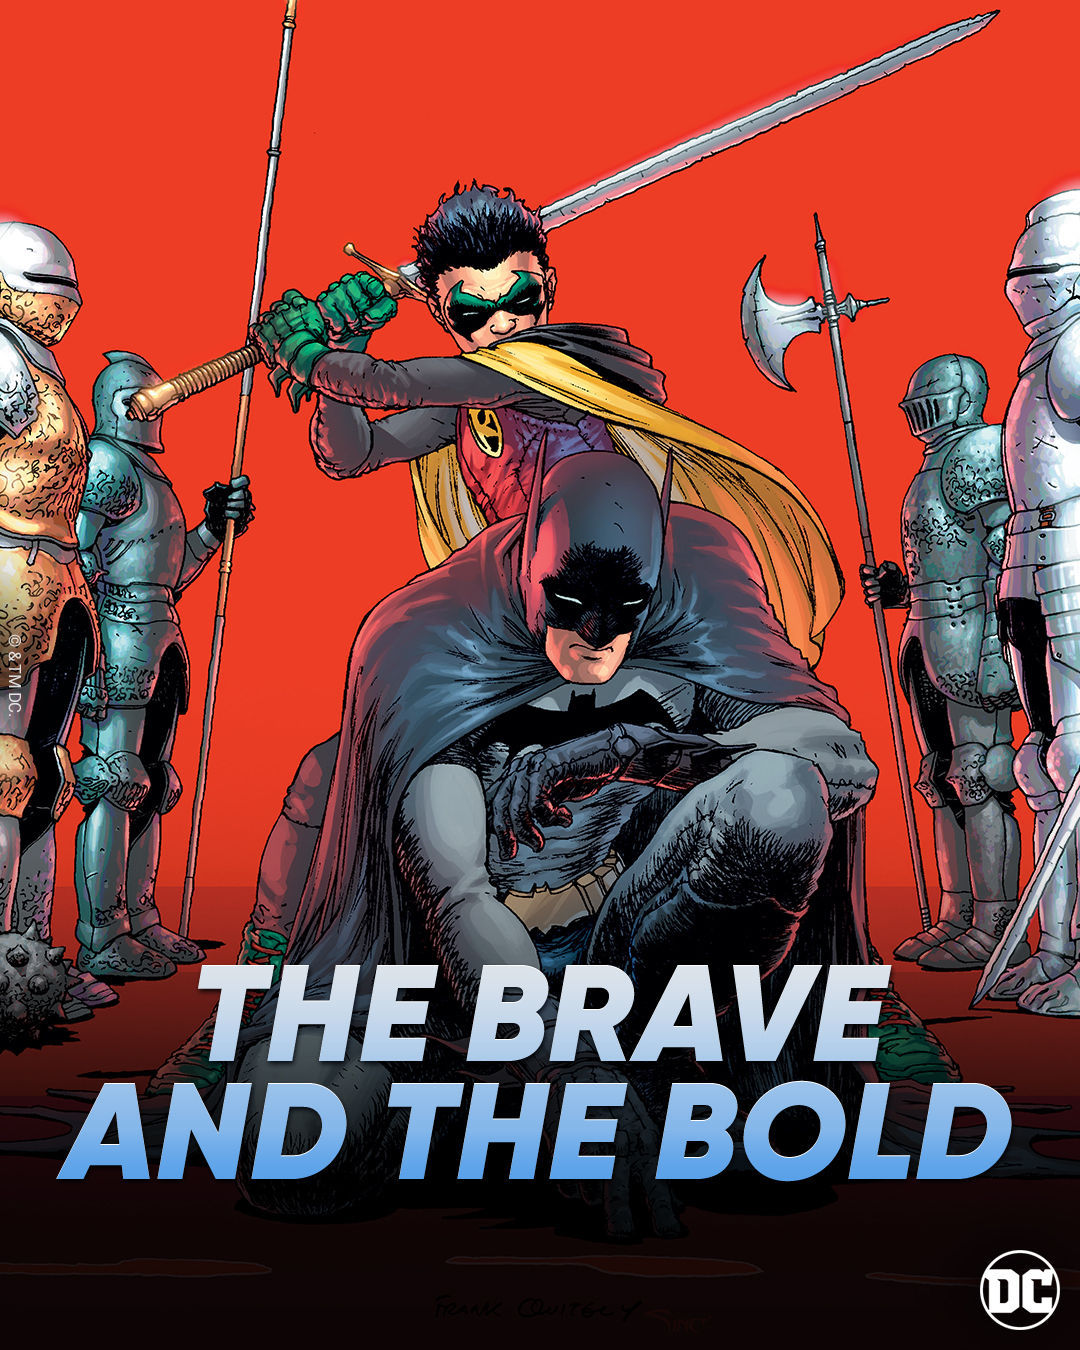 The Brave And The Bold: What We Know About The New Batman Movie